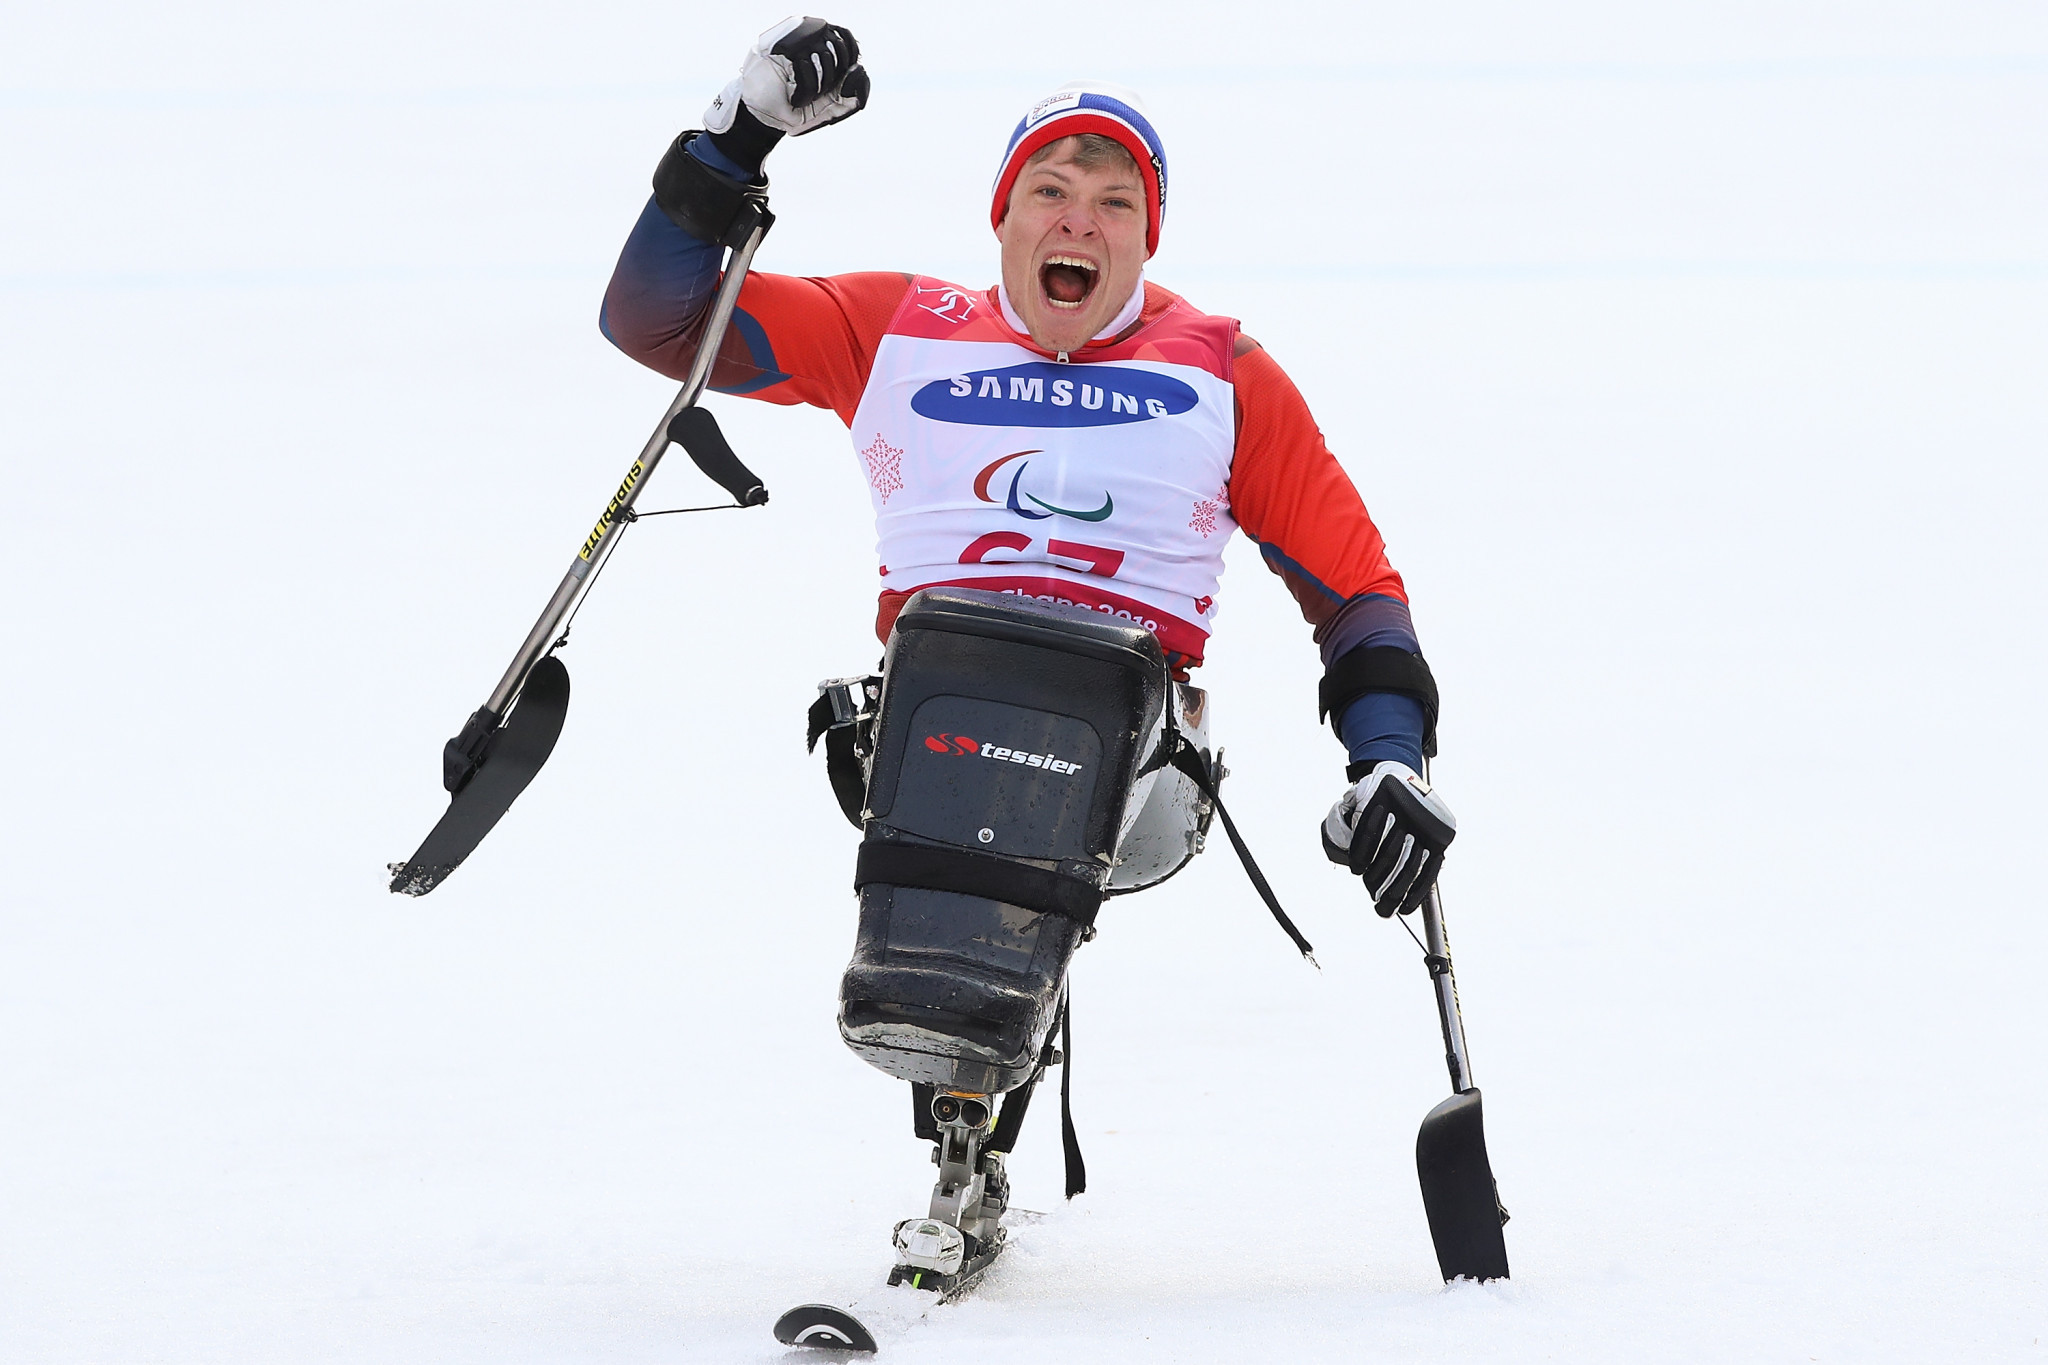 Norway's Jesper Pedersen secured his country's first Paralympic Games gold medal of Pyeongchang 2018 by winning the men's giant slalom sitting event ©Getty Images